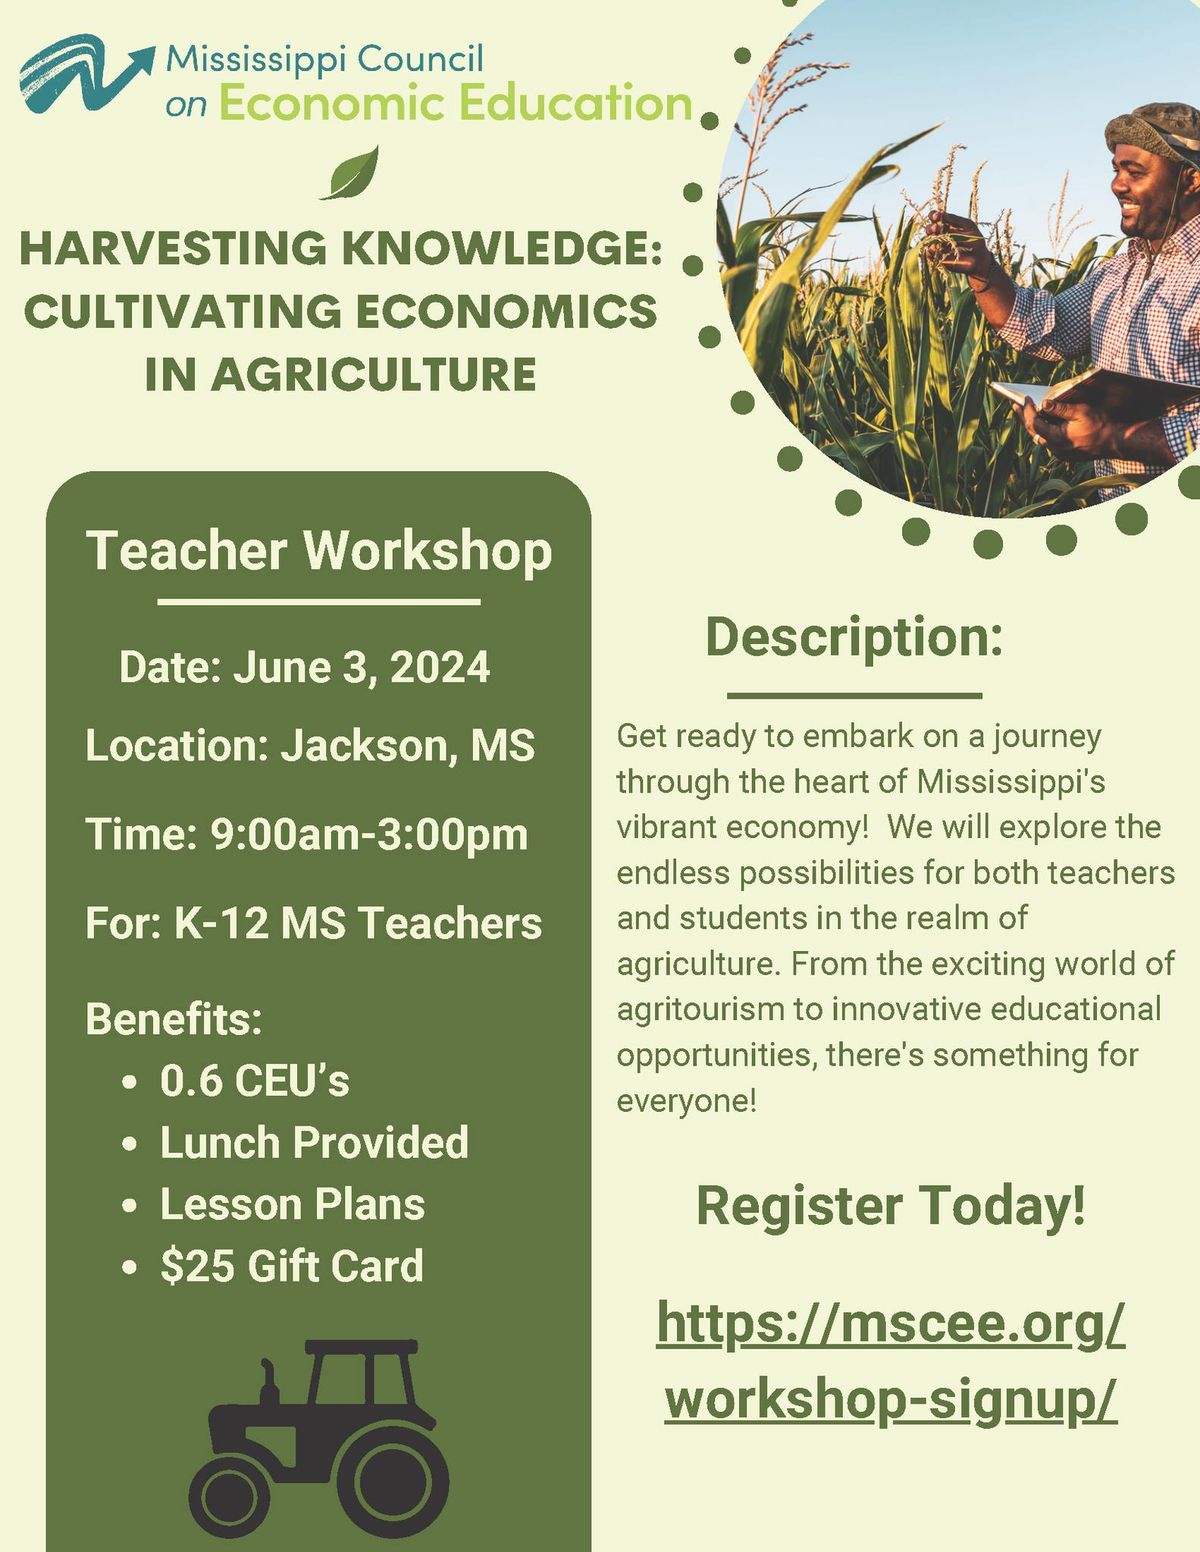 Harvesting Knowledge: Cultivating Economics in Agriculture